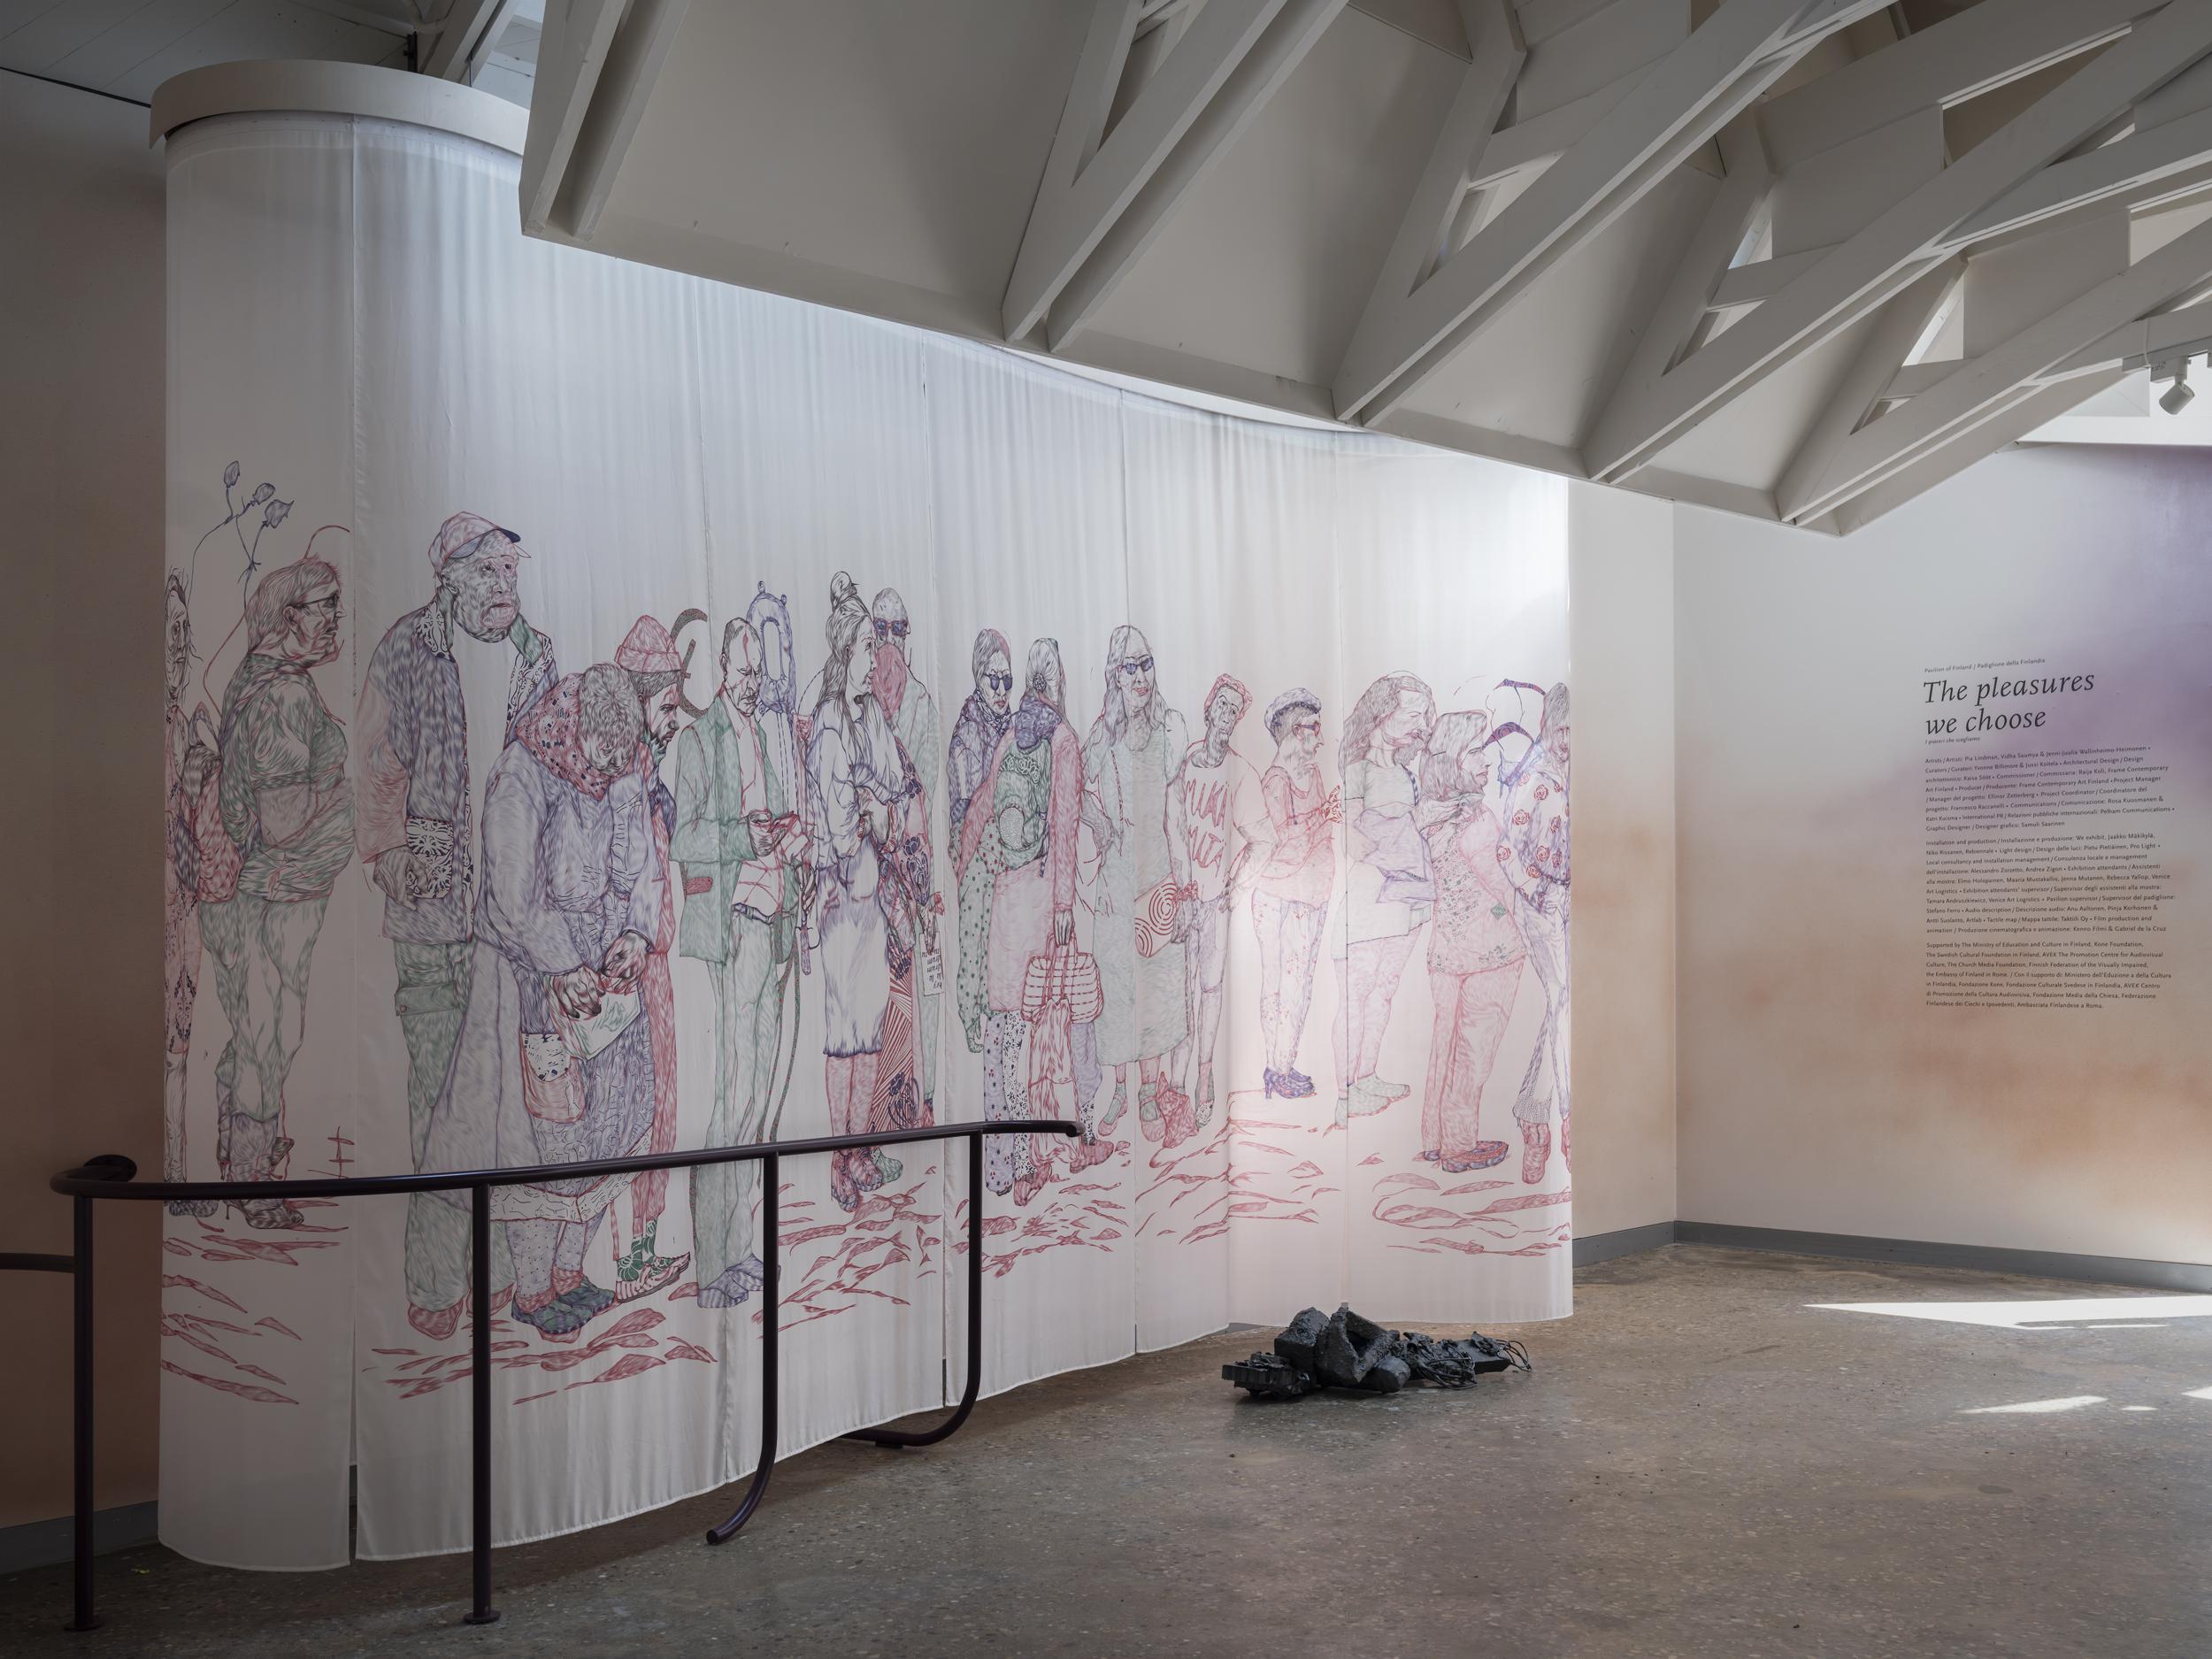 An exhibition space with a large silk cloth artwork. The silk cloth has a colorful drawing of people waiting in line. There's a dark handrail in front of the artwork.